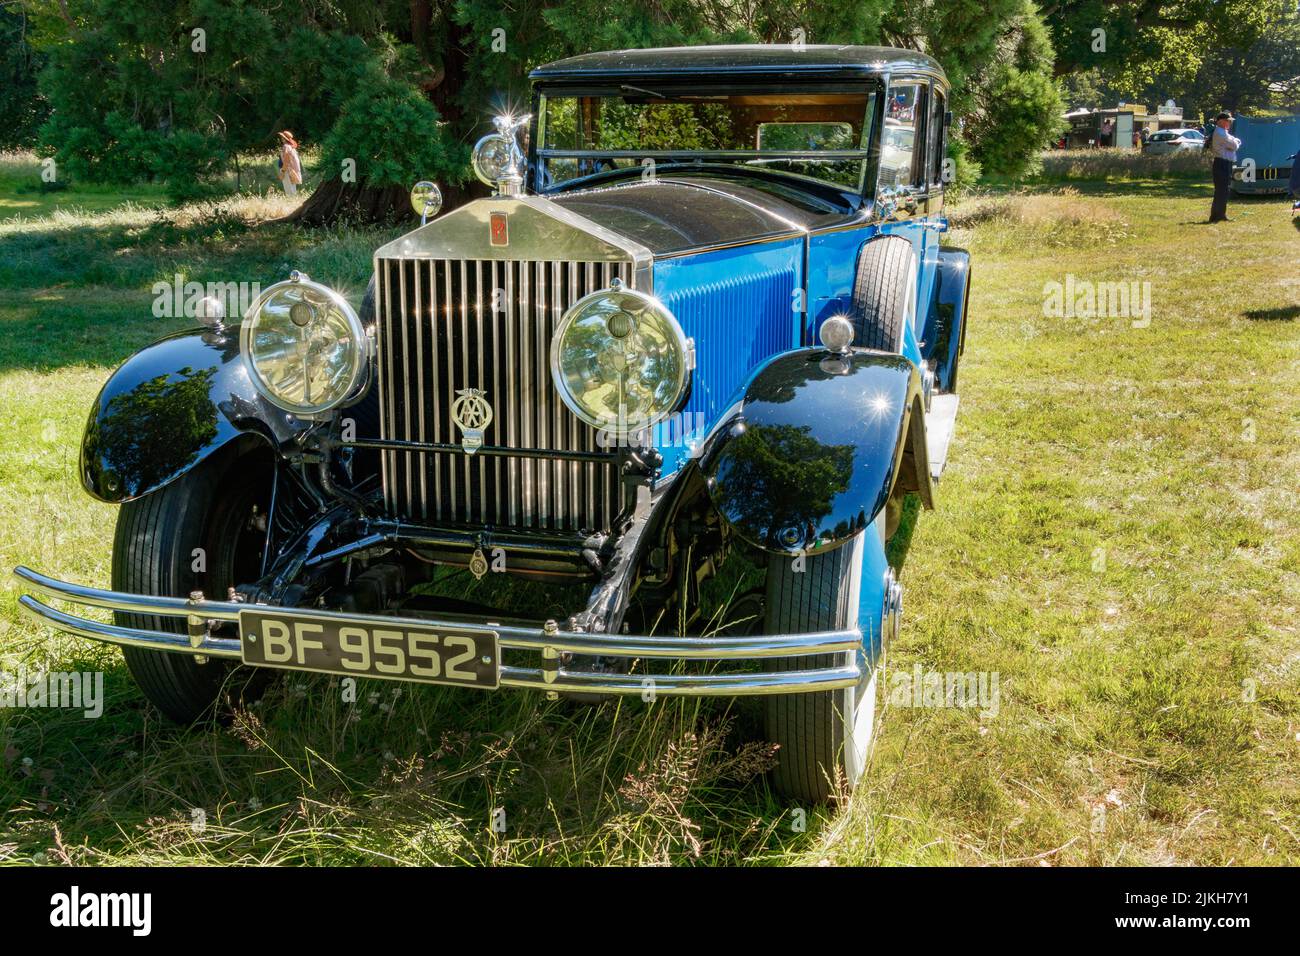 rollys royce at weston park classic car show Stock Photo